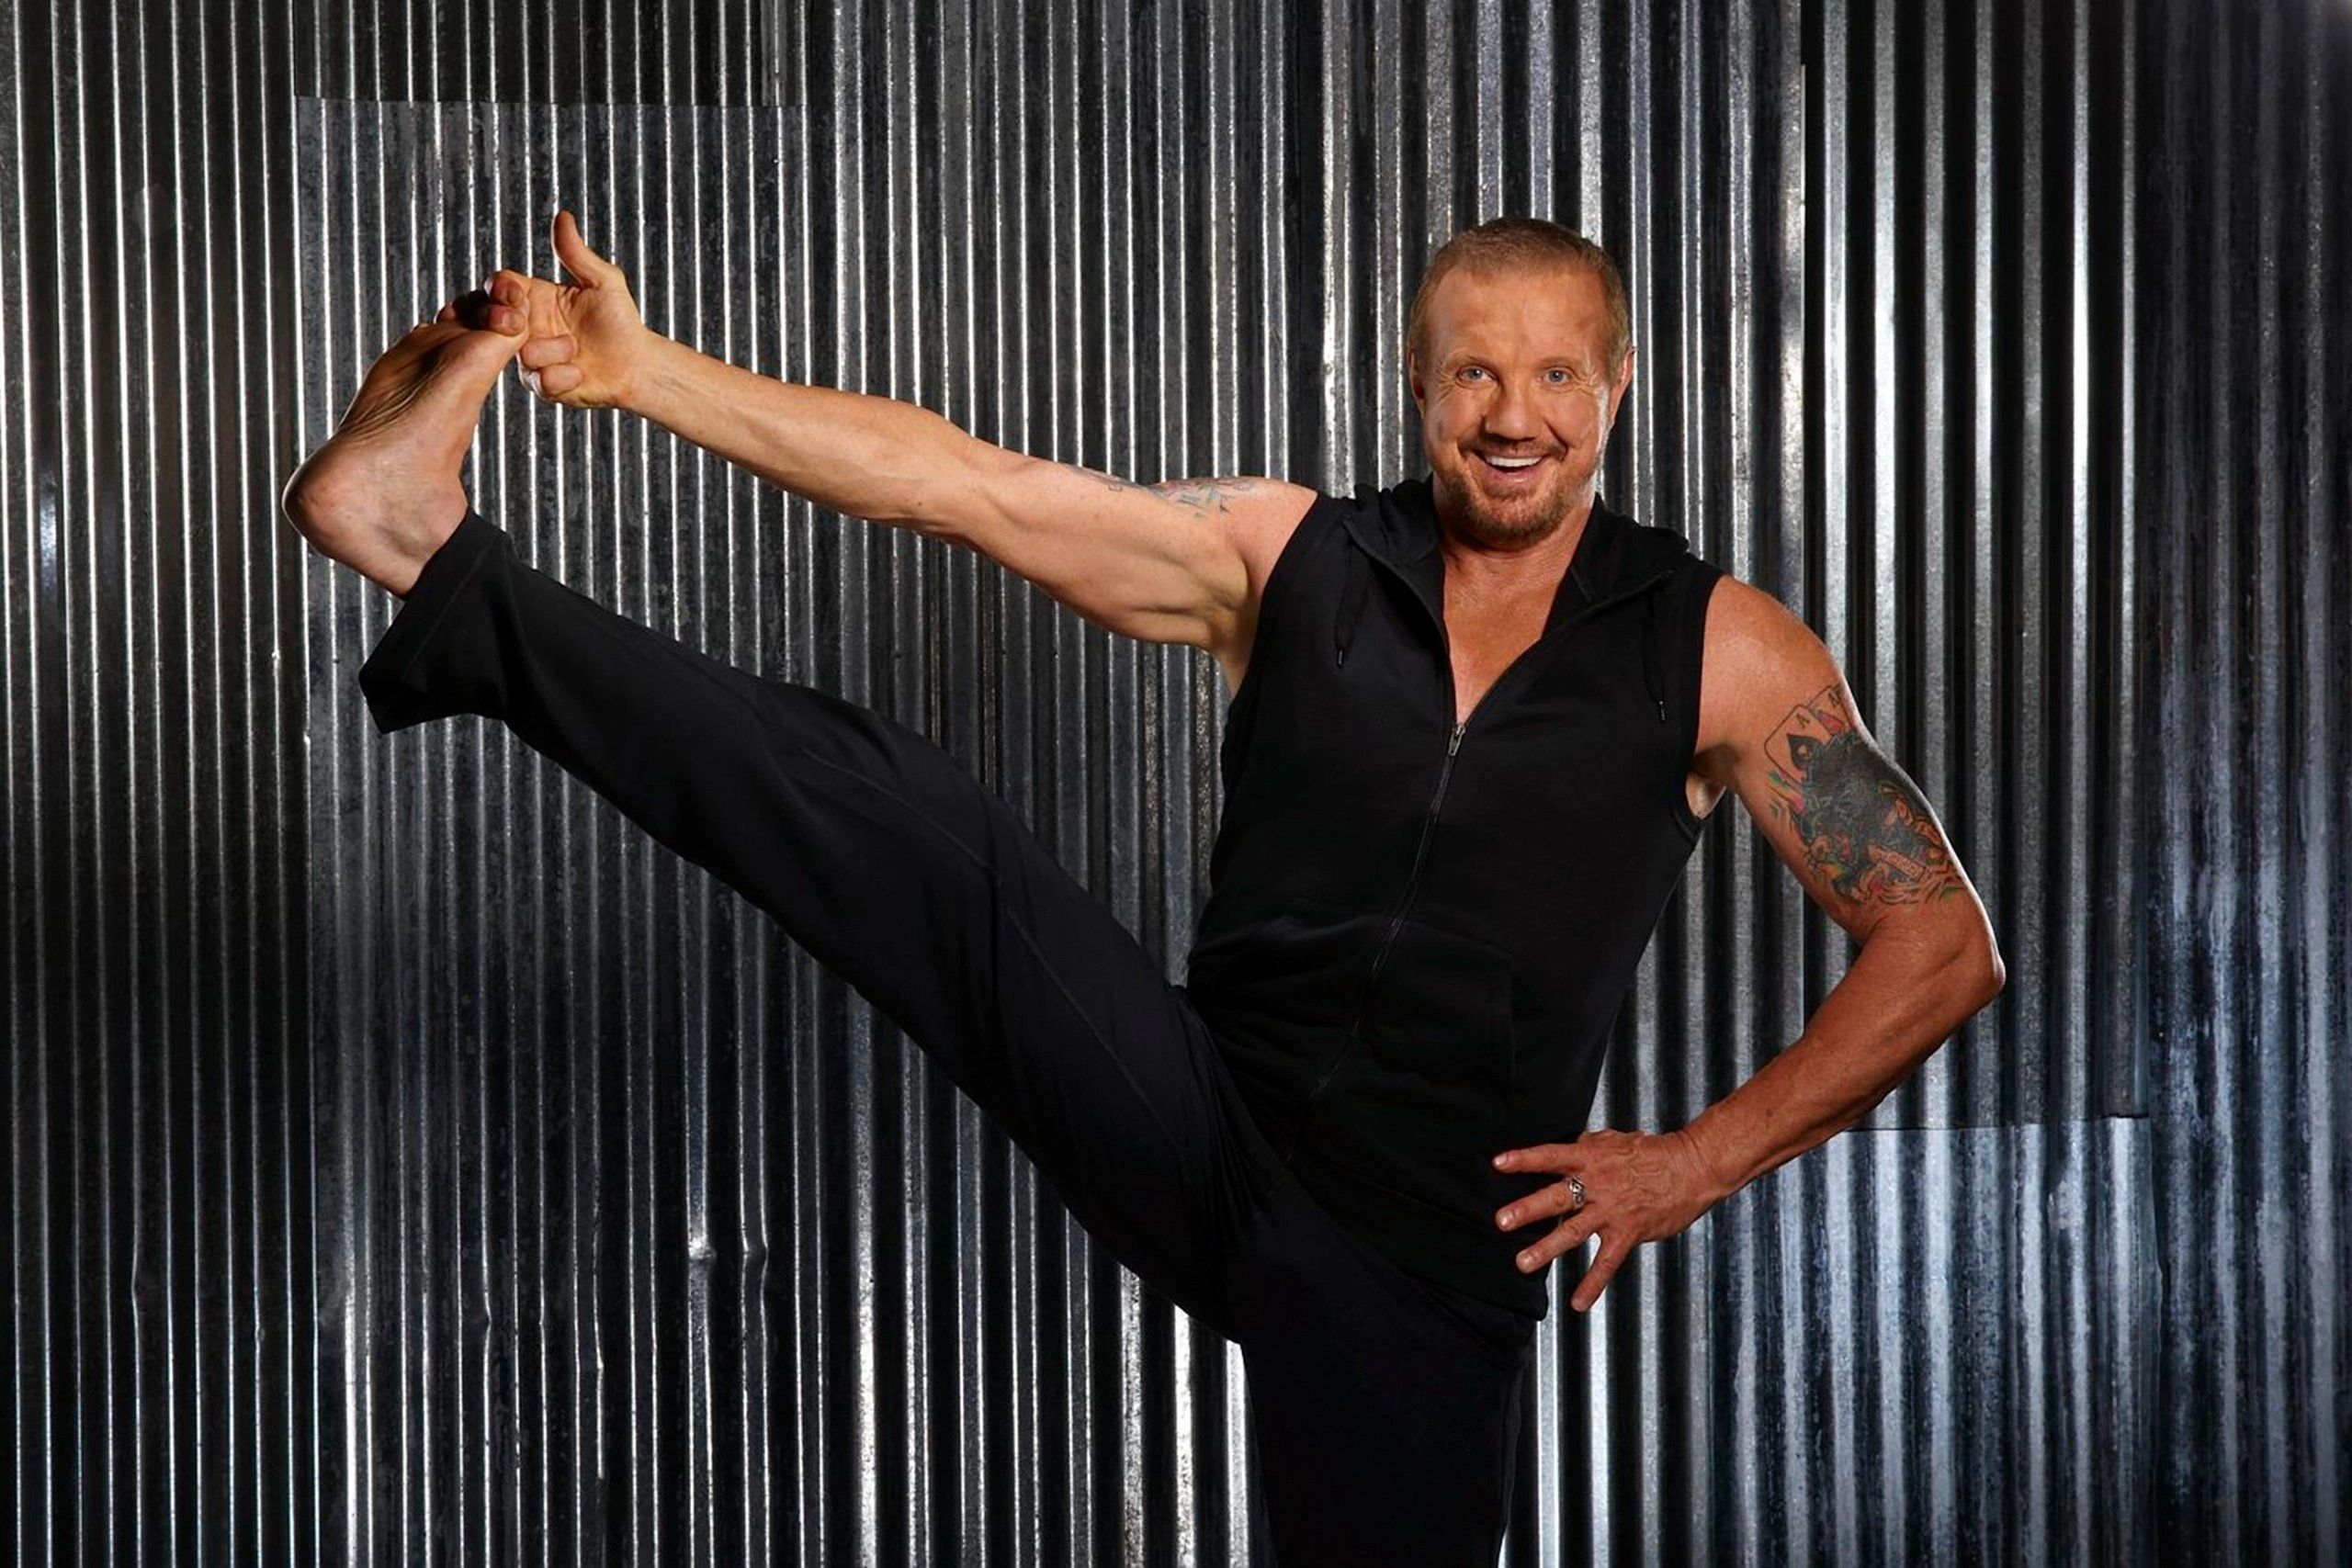 DIAMOND DALLAS PAGE TO KEYNOTE THE 2022 MARQUEE SHOW